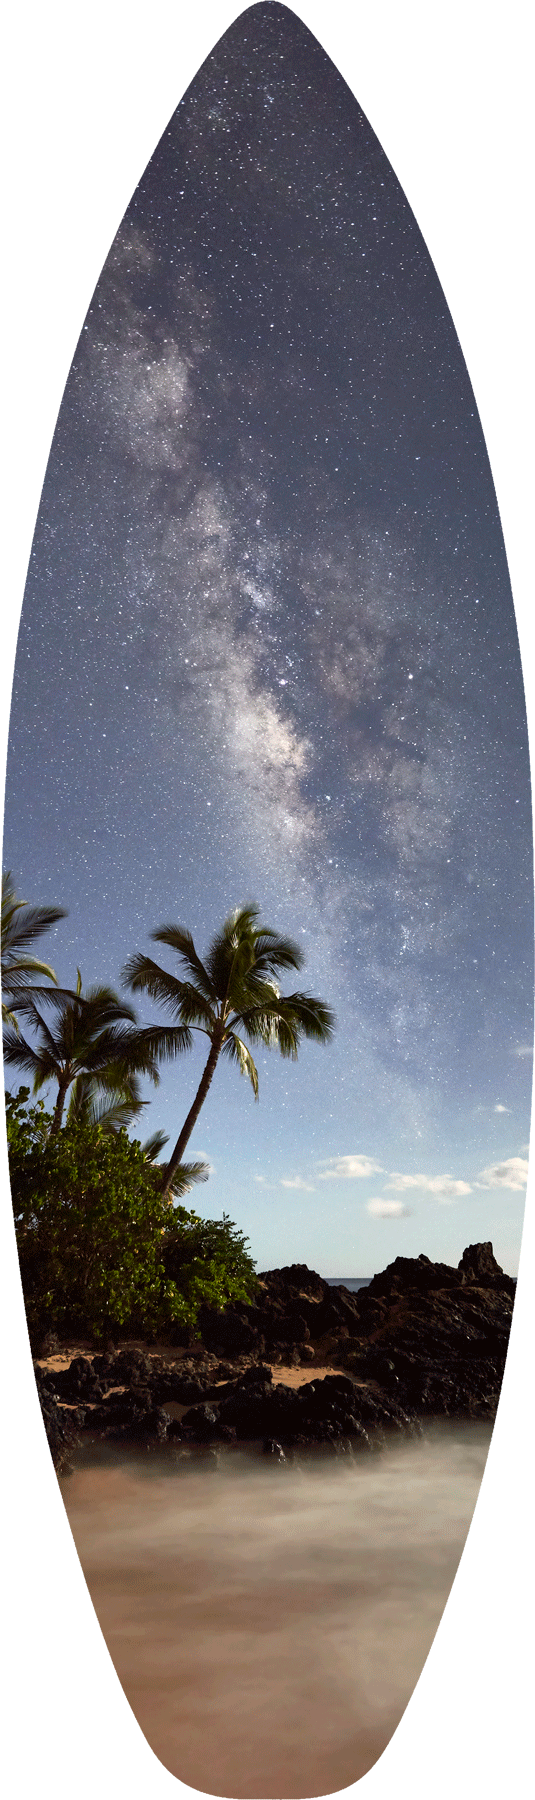 a night time photograph featuring the milky way galaxy rising over palm trees at secret beach on the hawaiian island of Maui.  Photo by Andrew Shoemaker